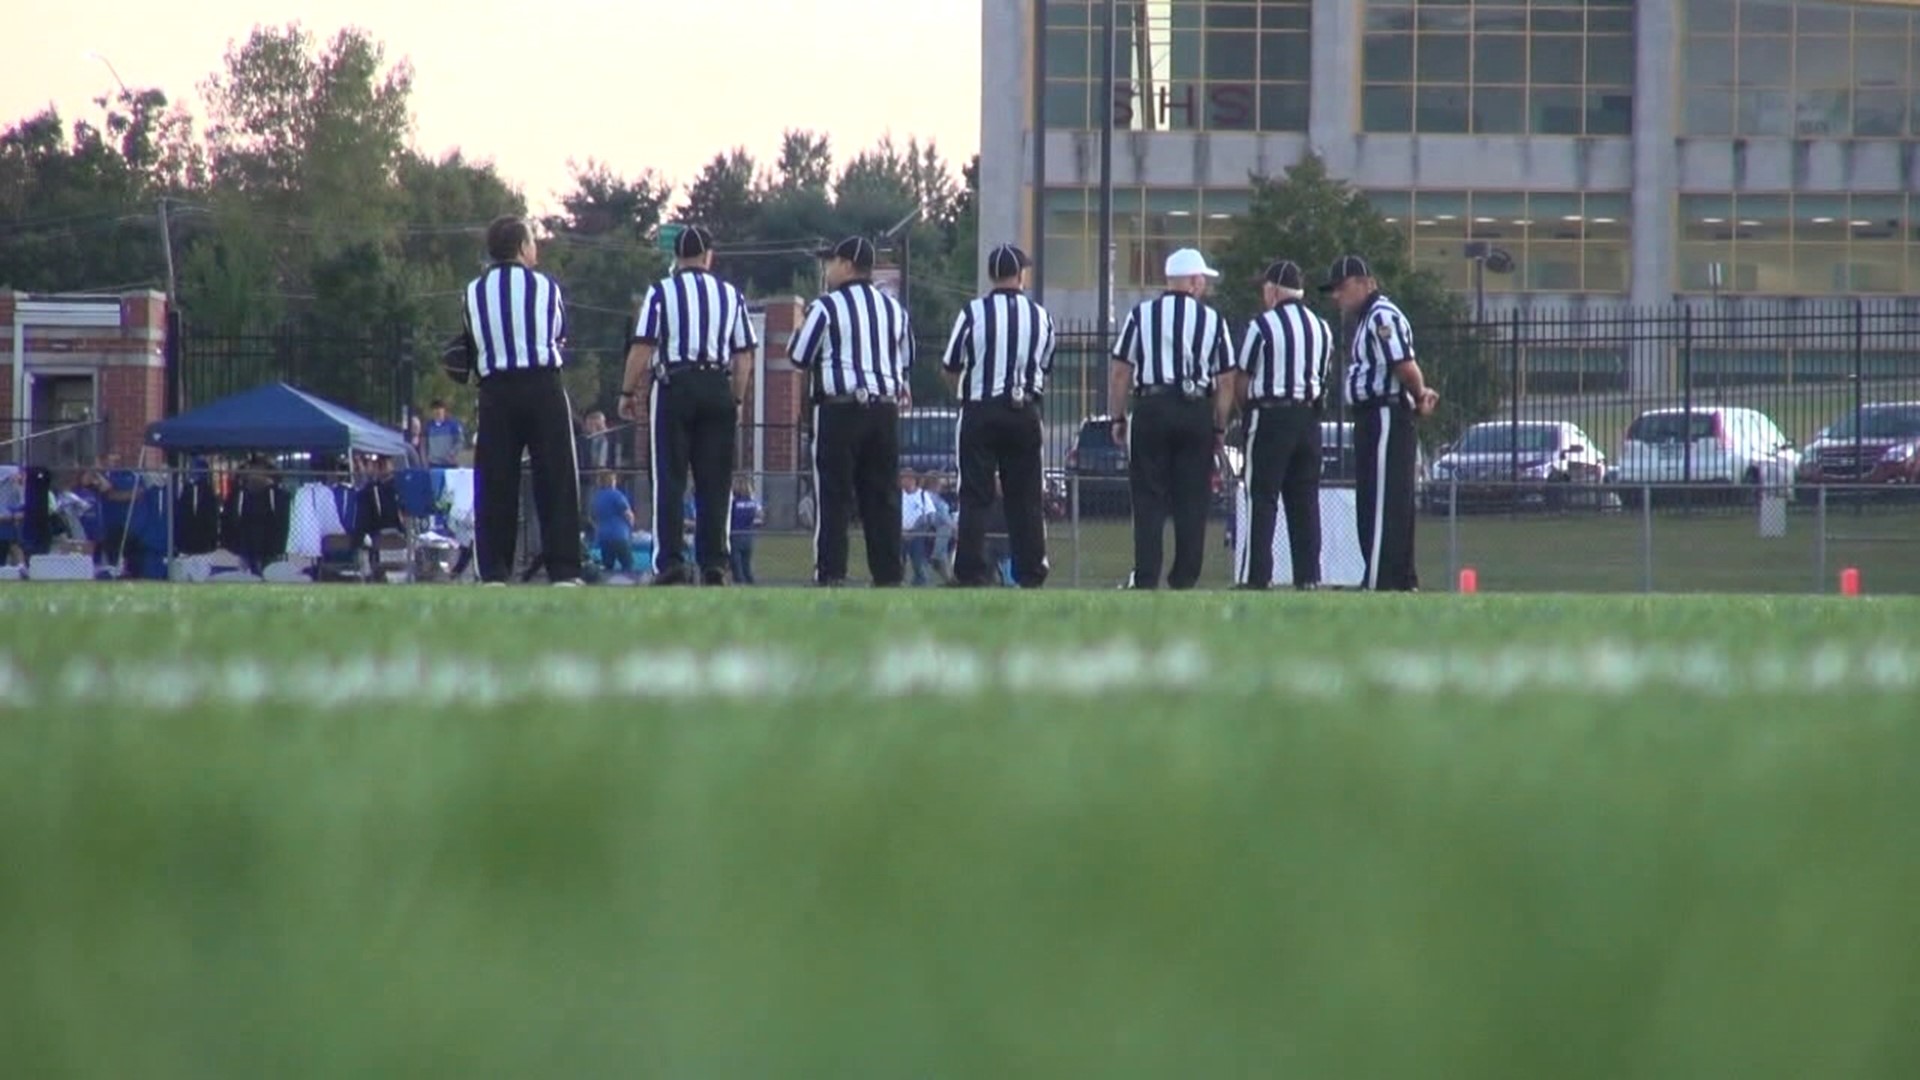 School administrators across northeastern and central Pennsylvania are working to make sure there are enough referees to cover all high school sports.